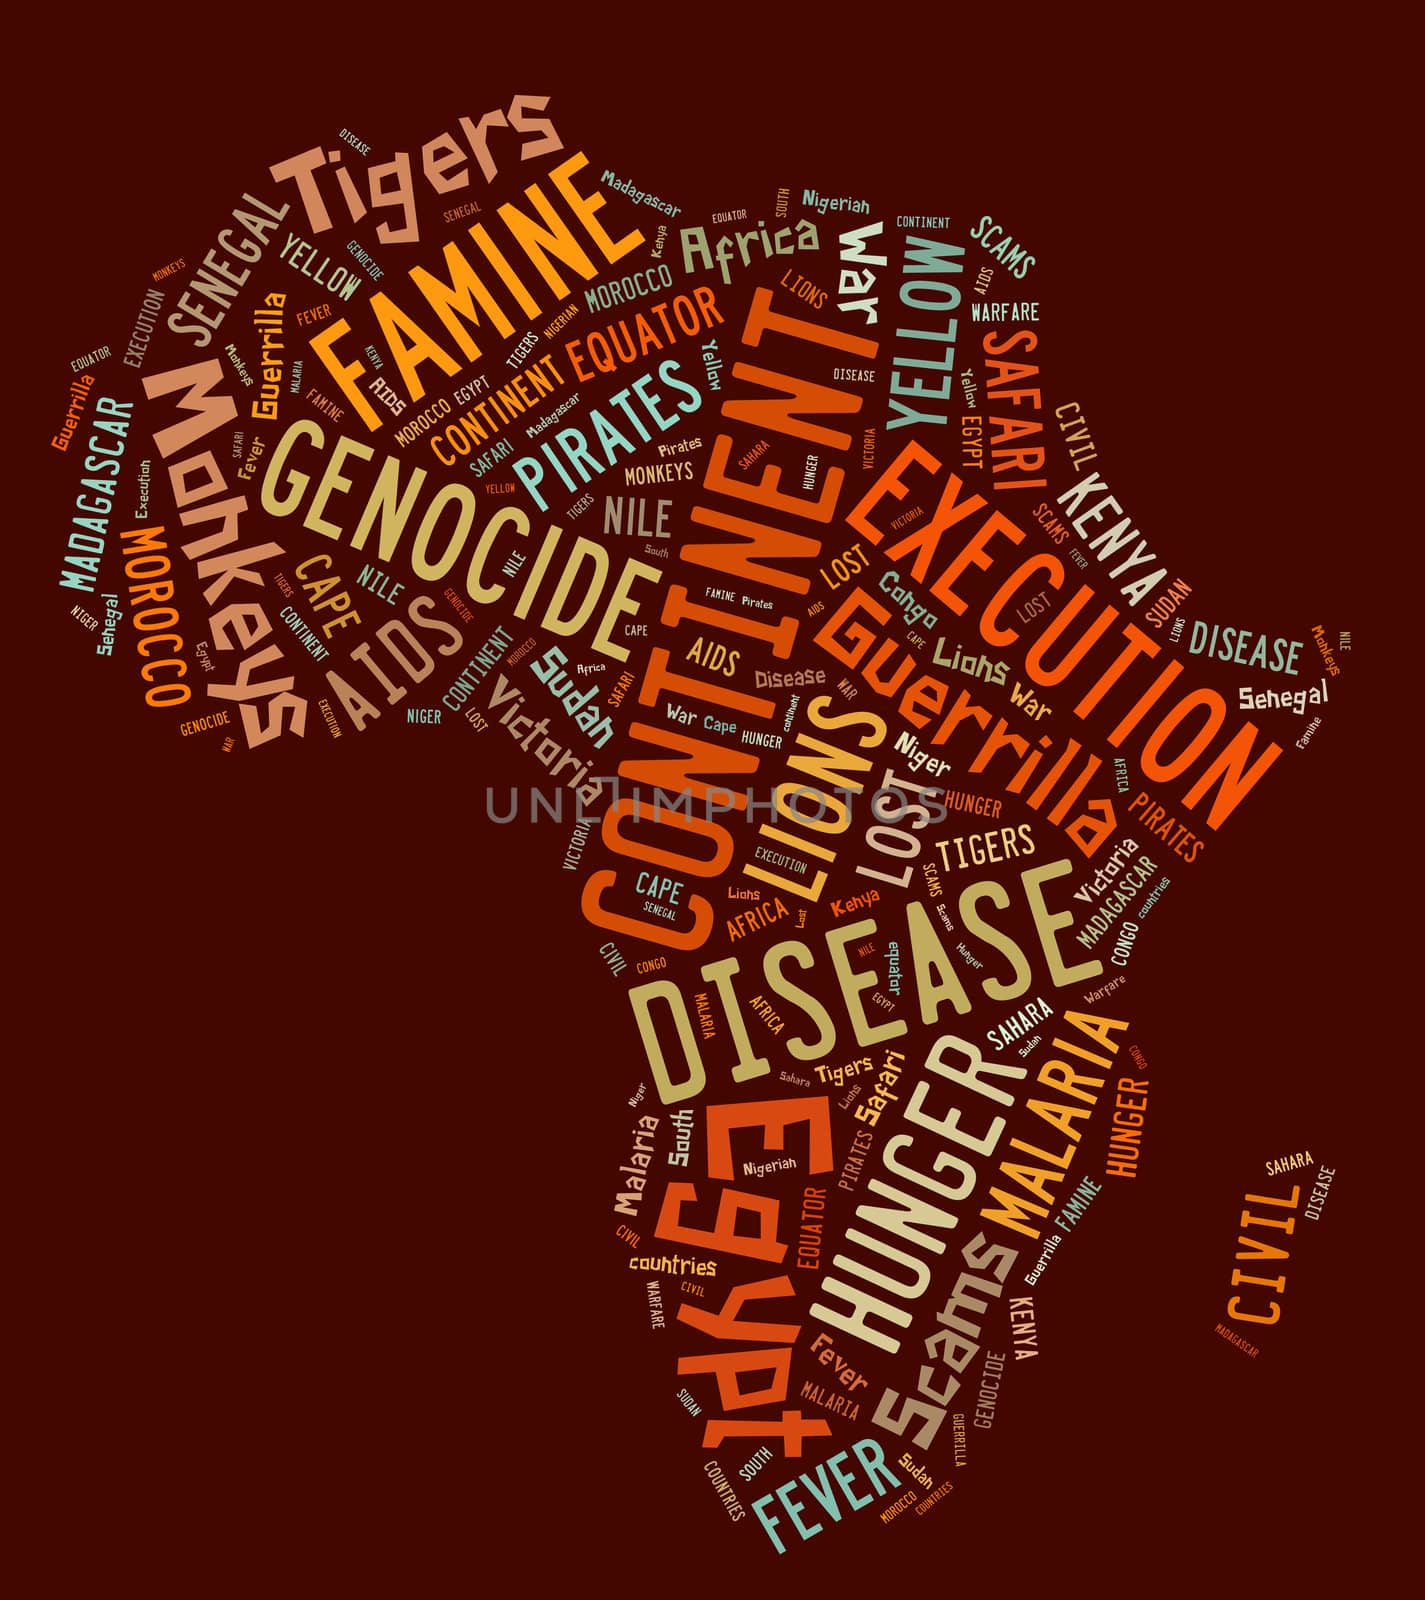 Africa concept tag cloud on a brown background